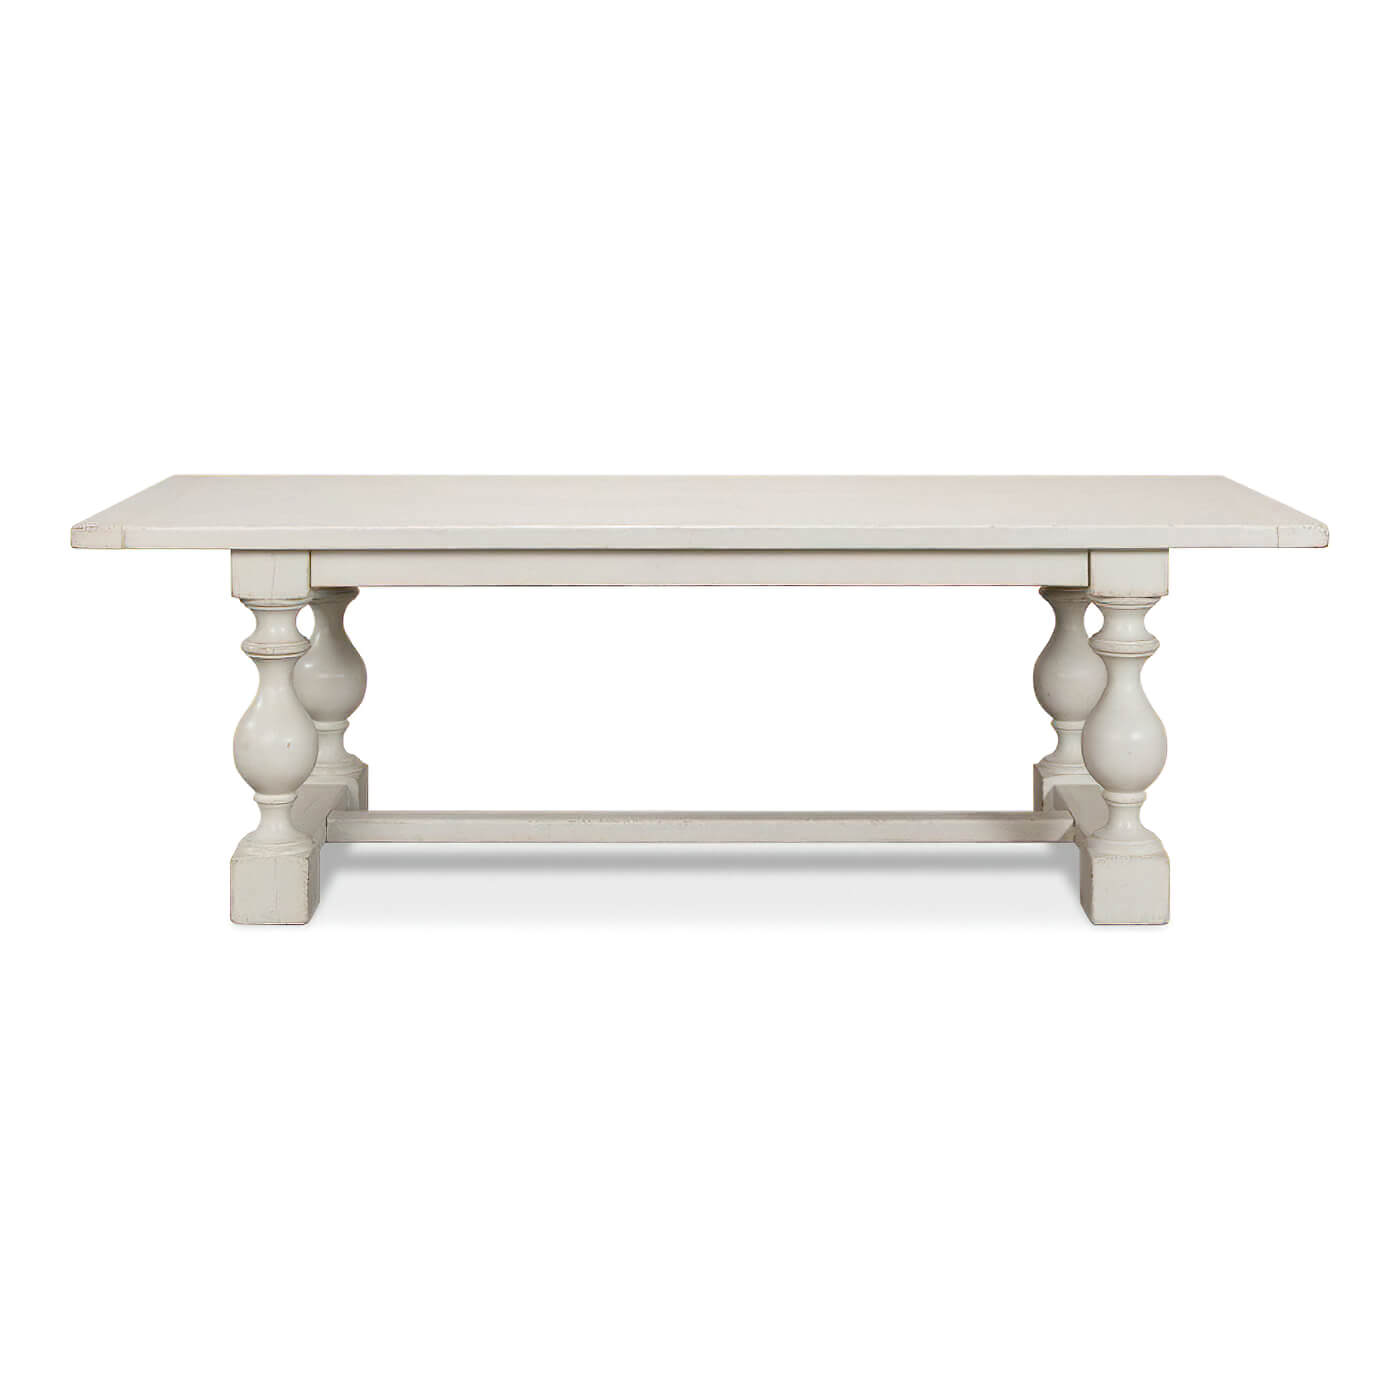 English Country Antique White Dining Table - English Georgian America